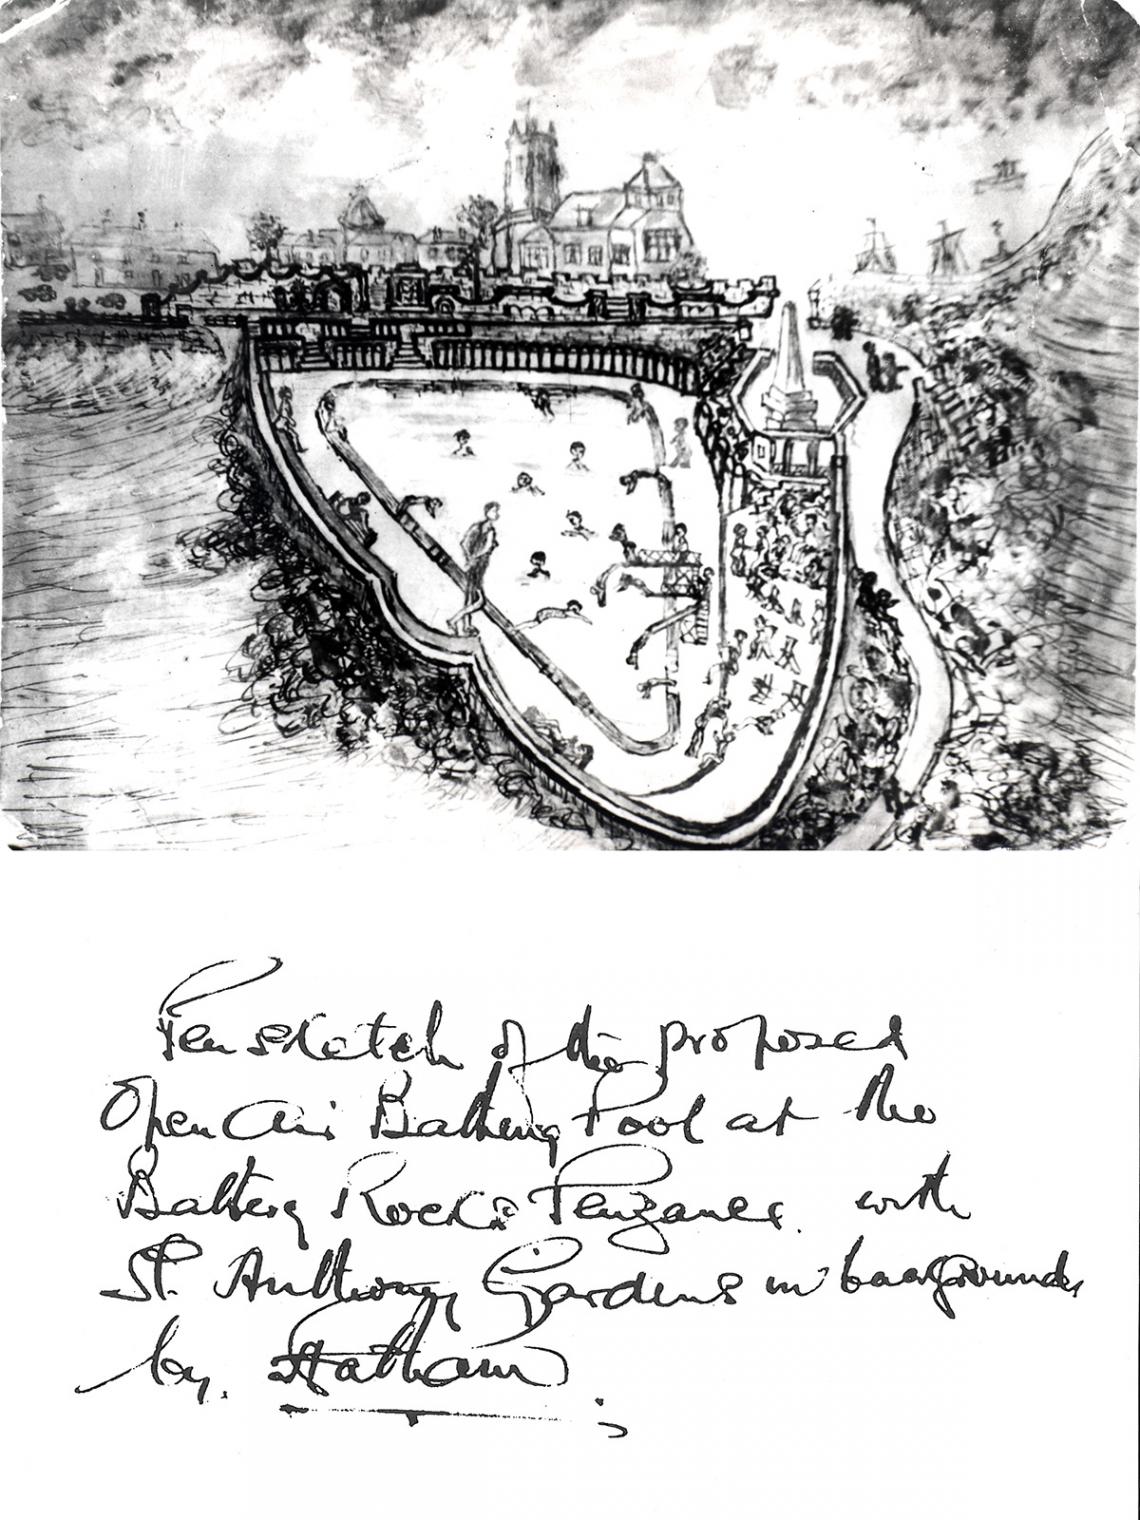 Pen sketch of proposed pool and hadwritten text